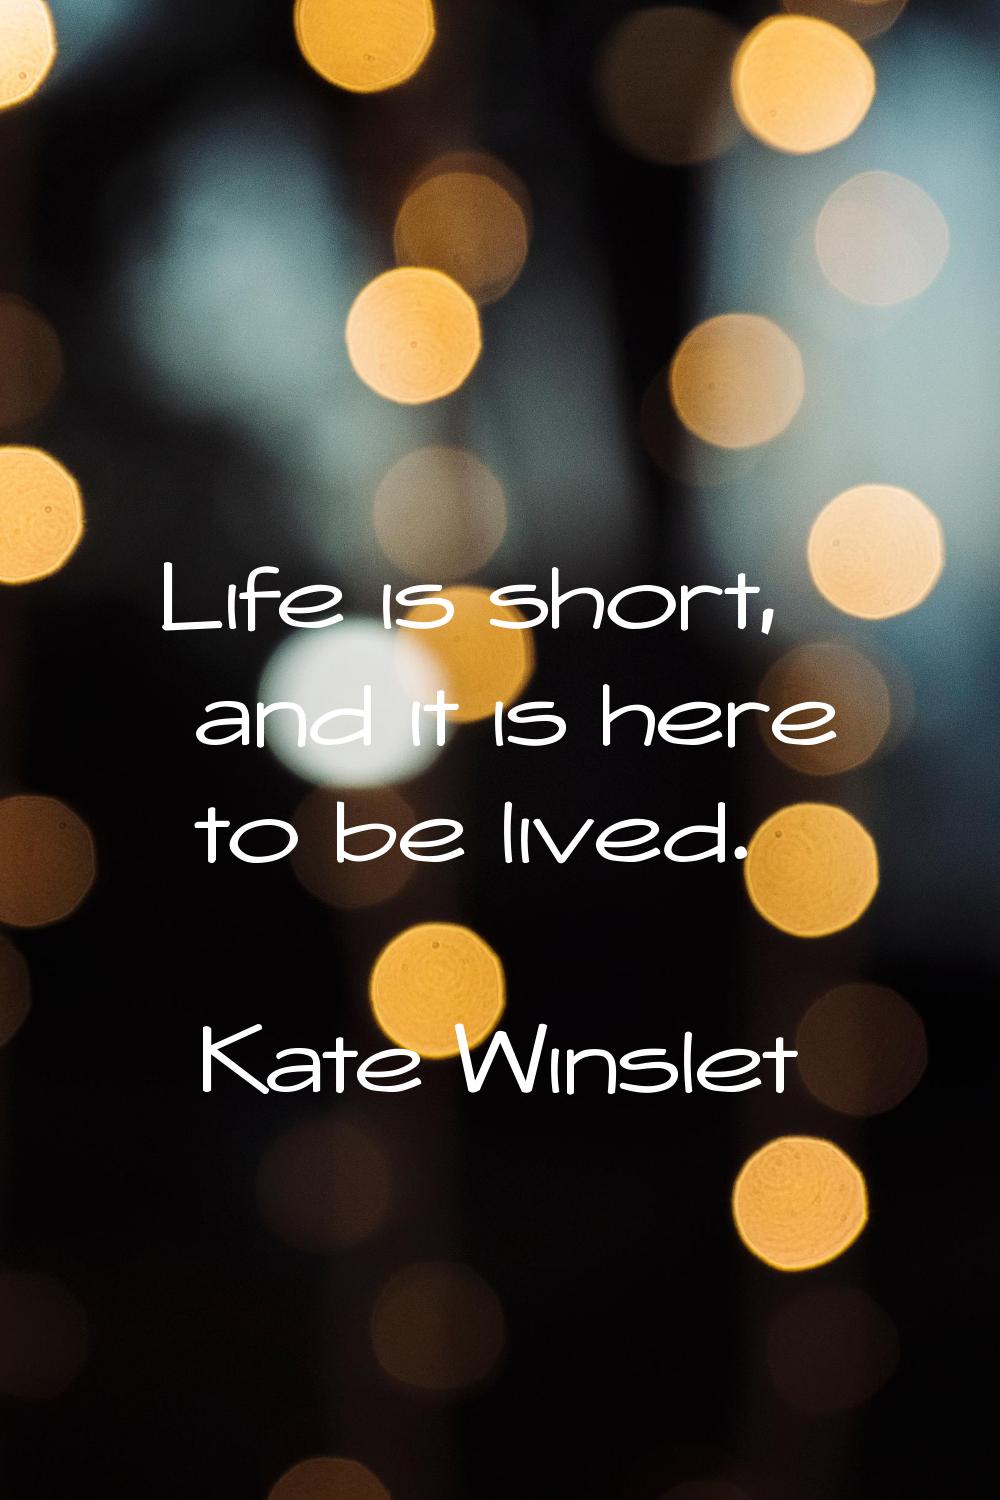 Life is short, and it is here to be lived.